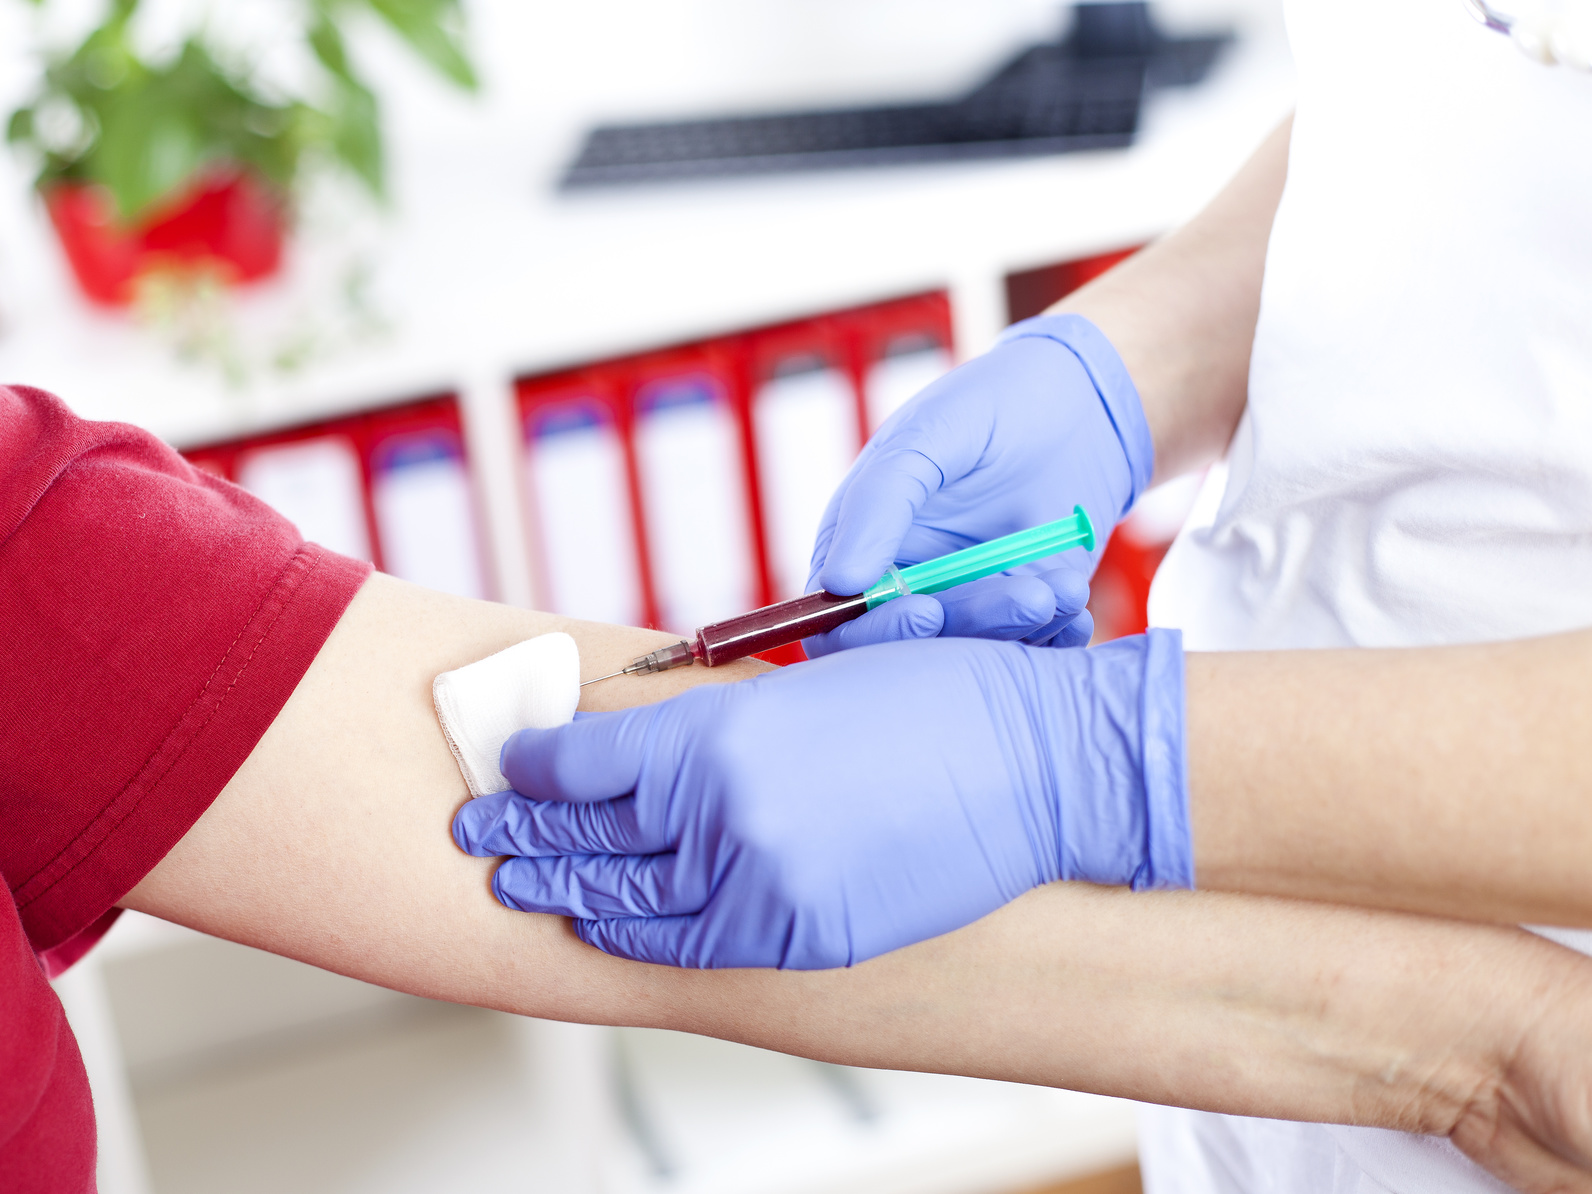 a blood sample is taken from a woman